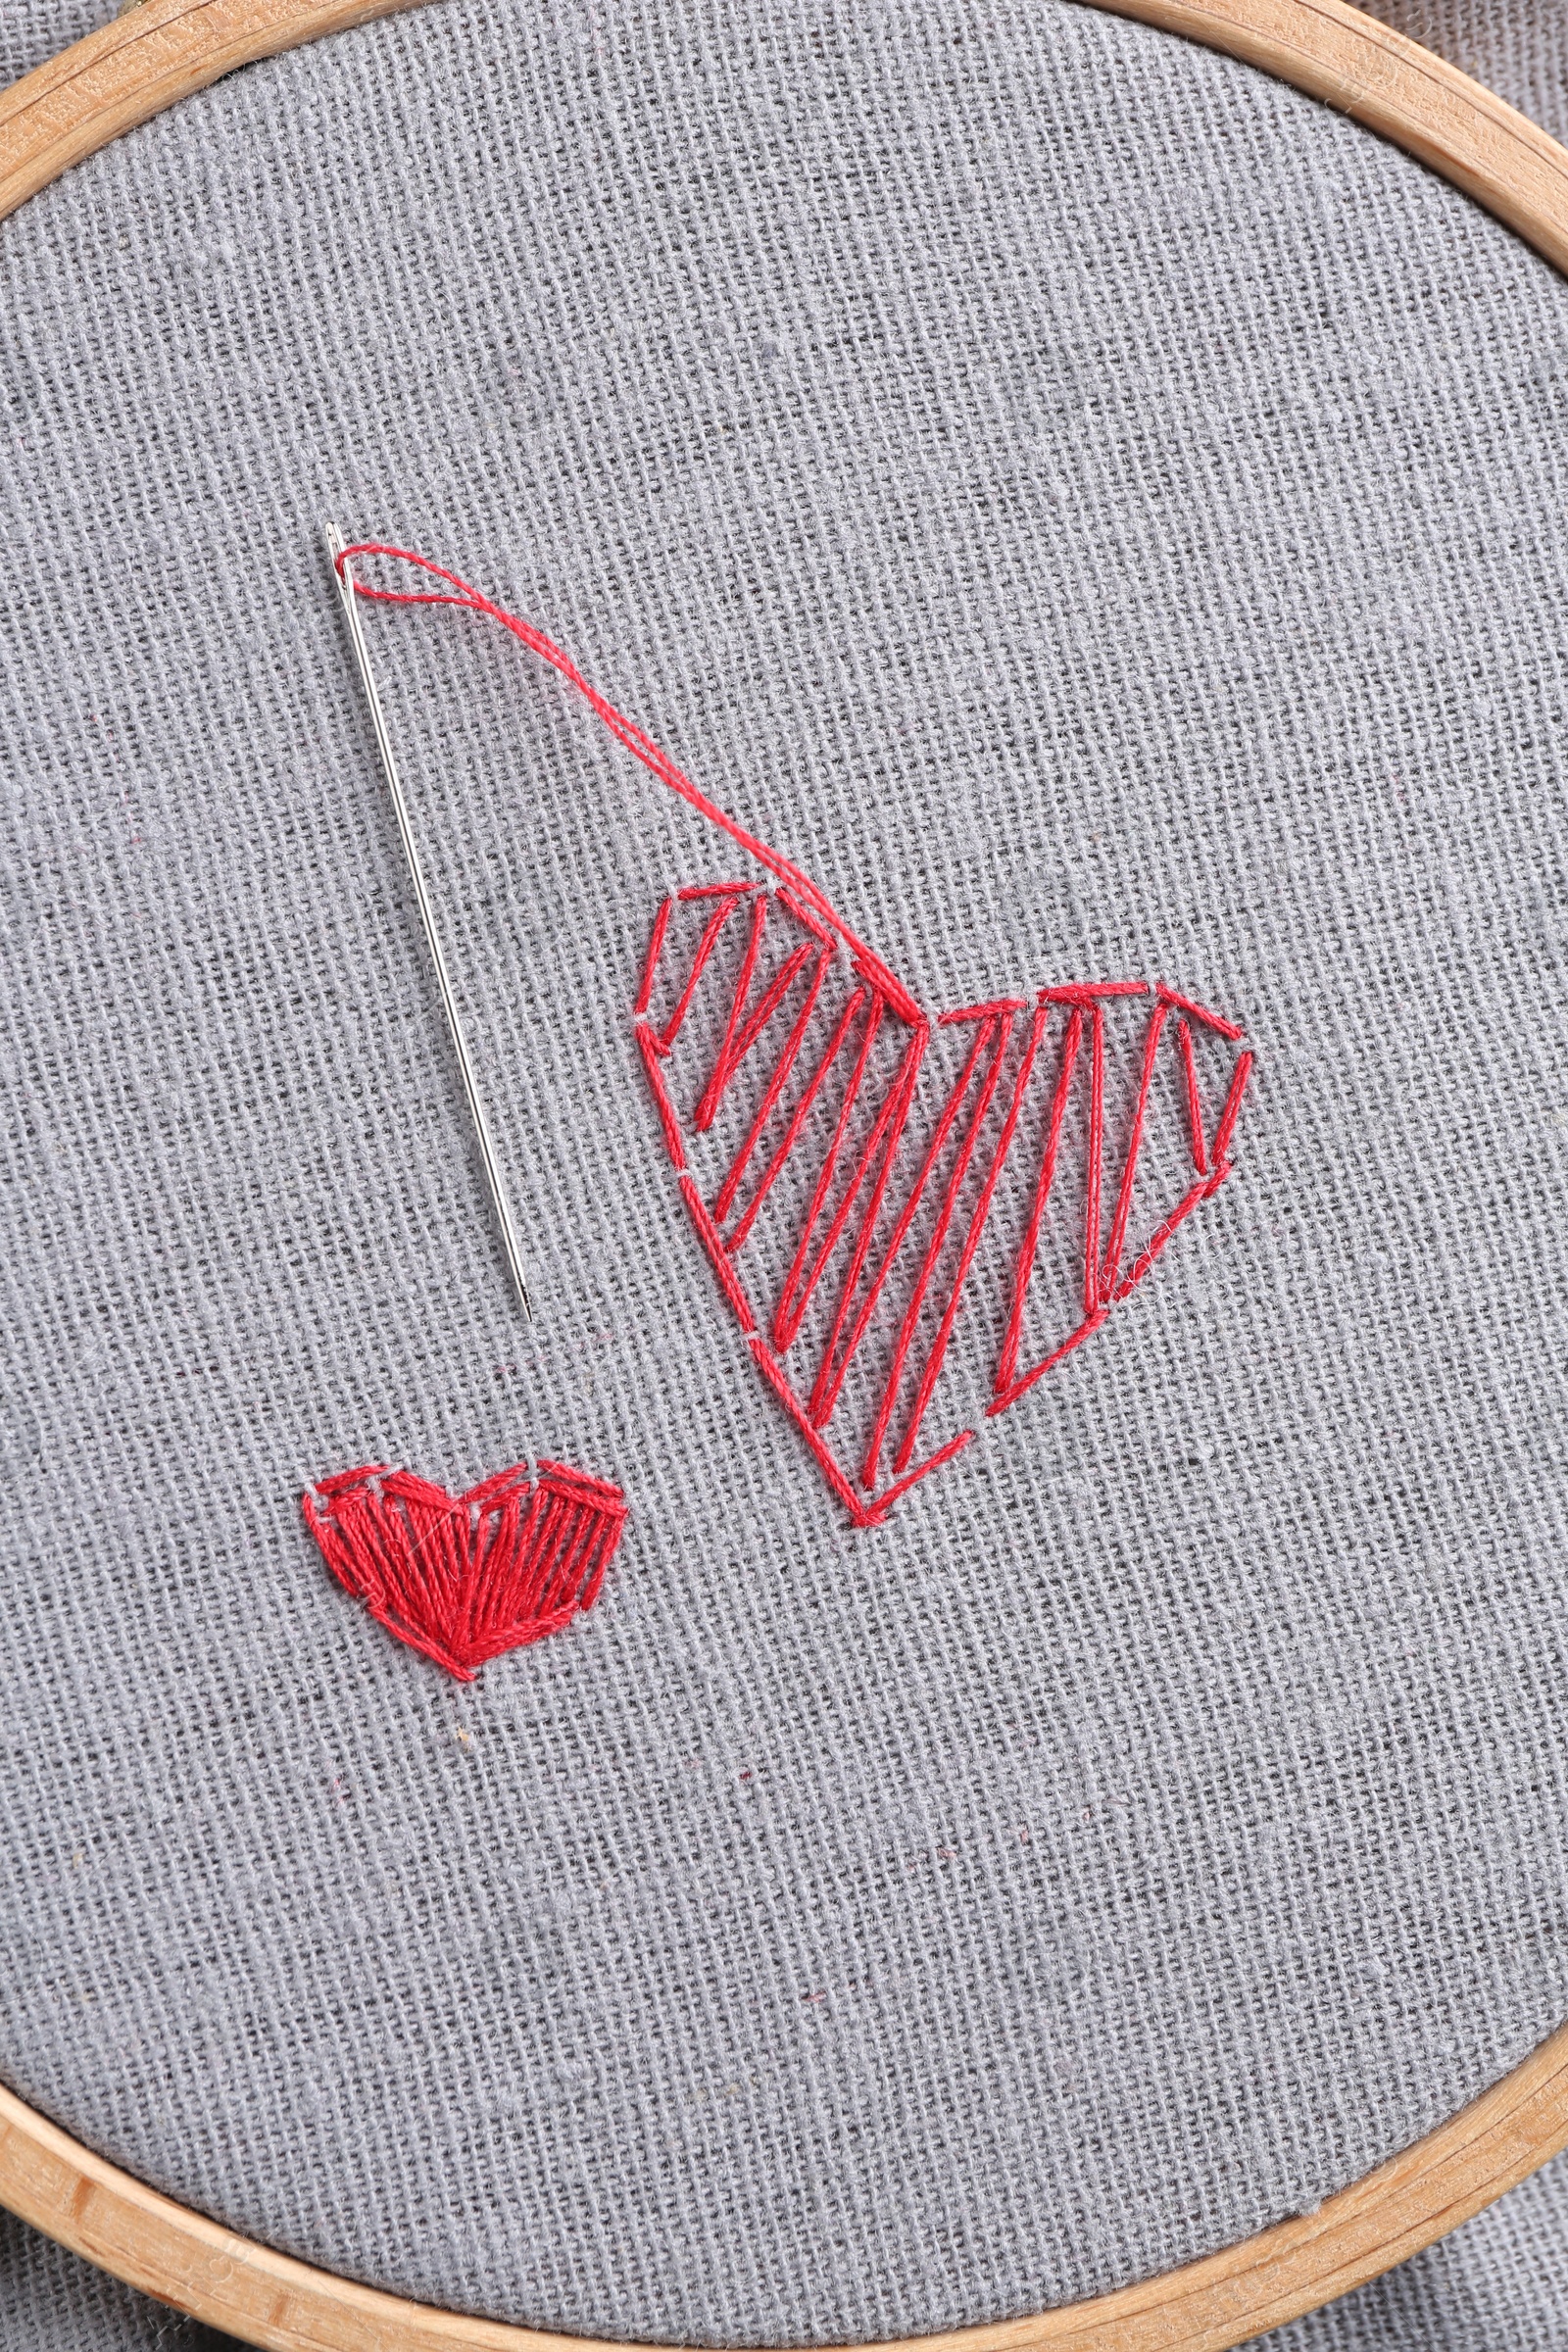 Photo of Embroidered red hearts and needle on light grey cloth, top view